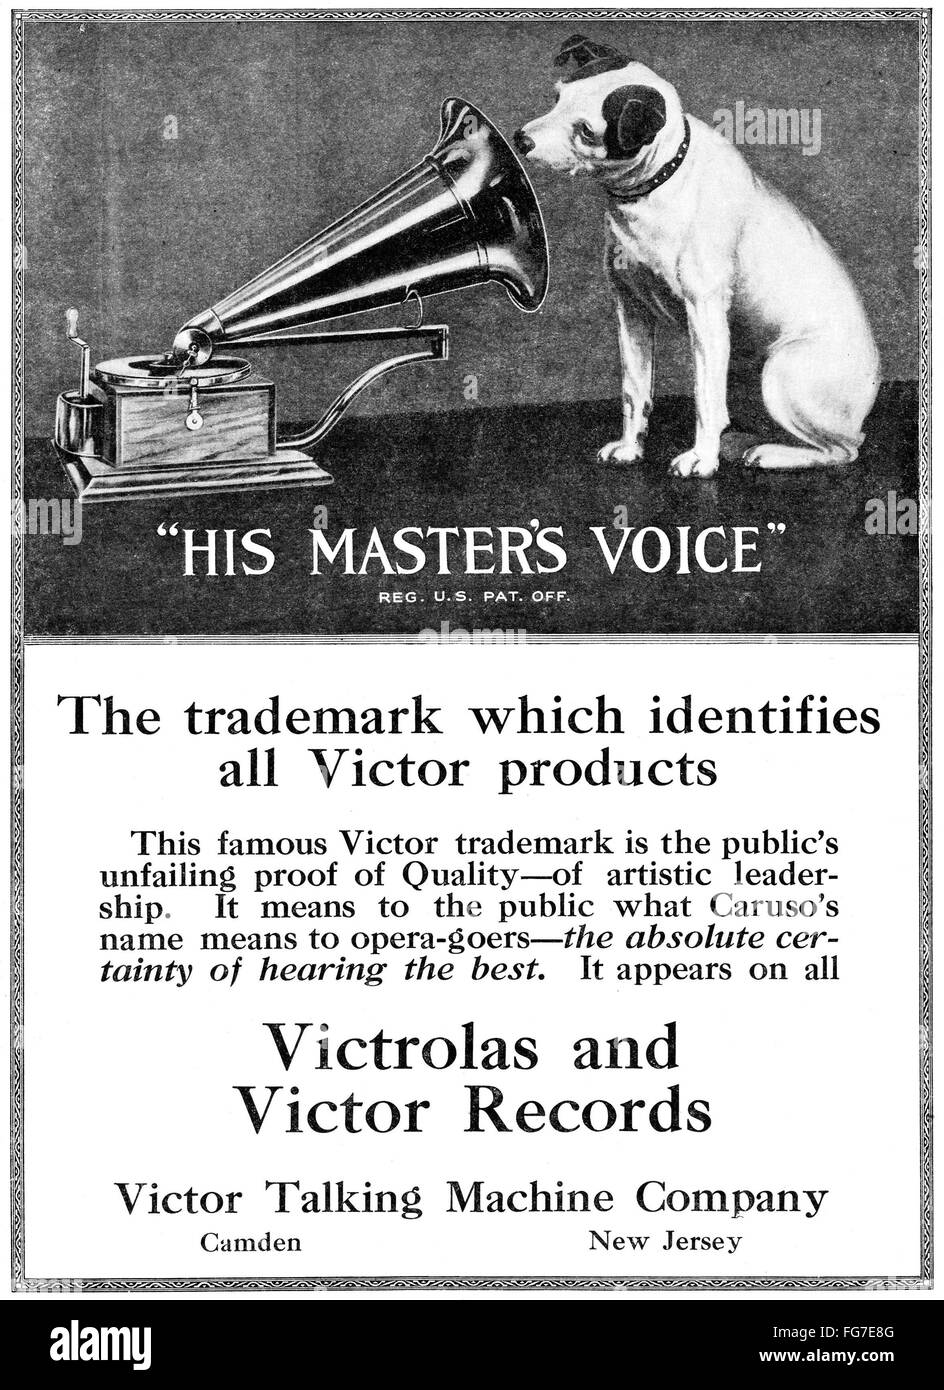 AD: RCA VICTOR, 1920. /nAmerican advertisement for Victorolas and Victor Records. Illustration, 1920. Stock Photo